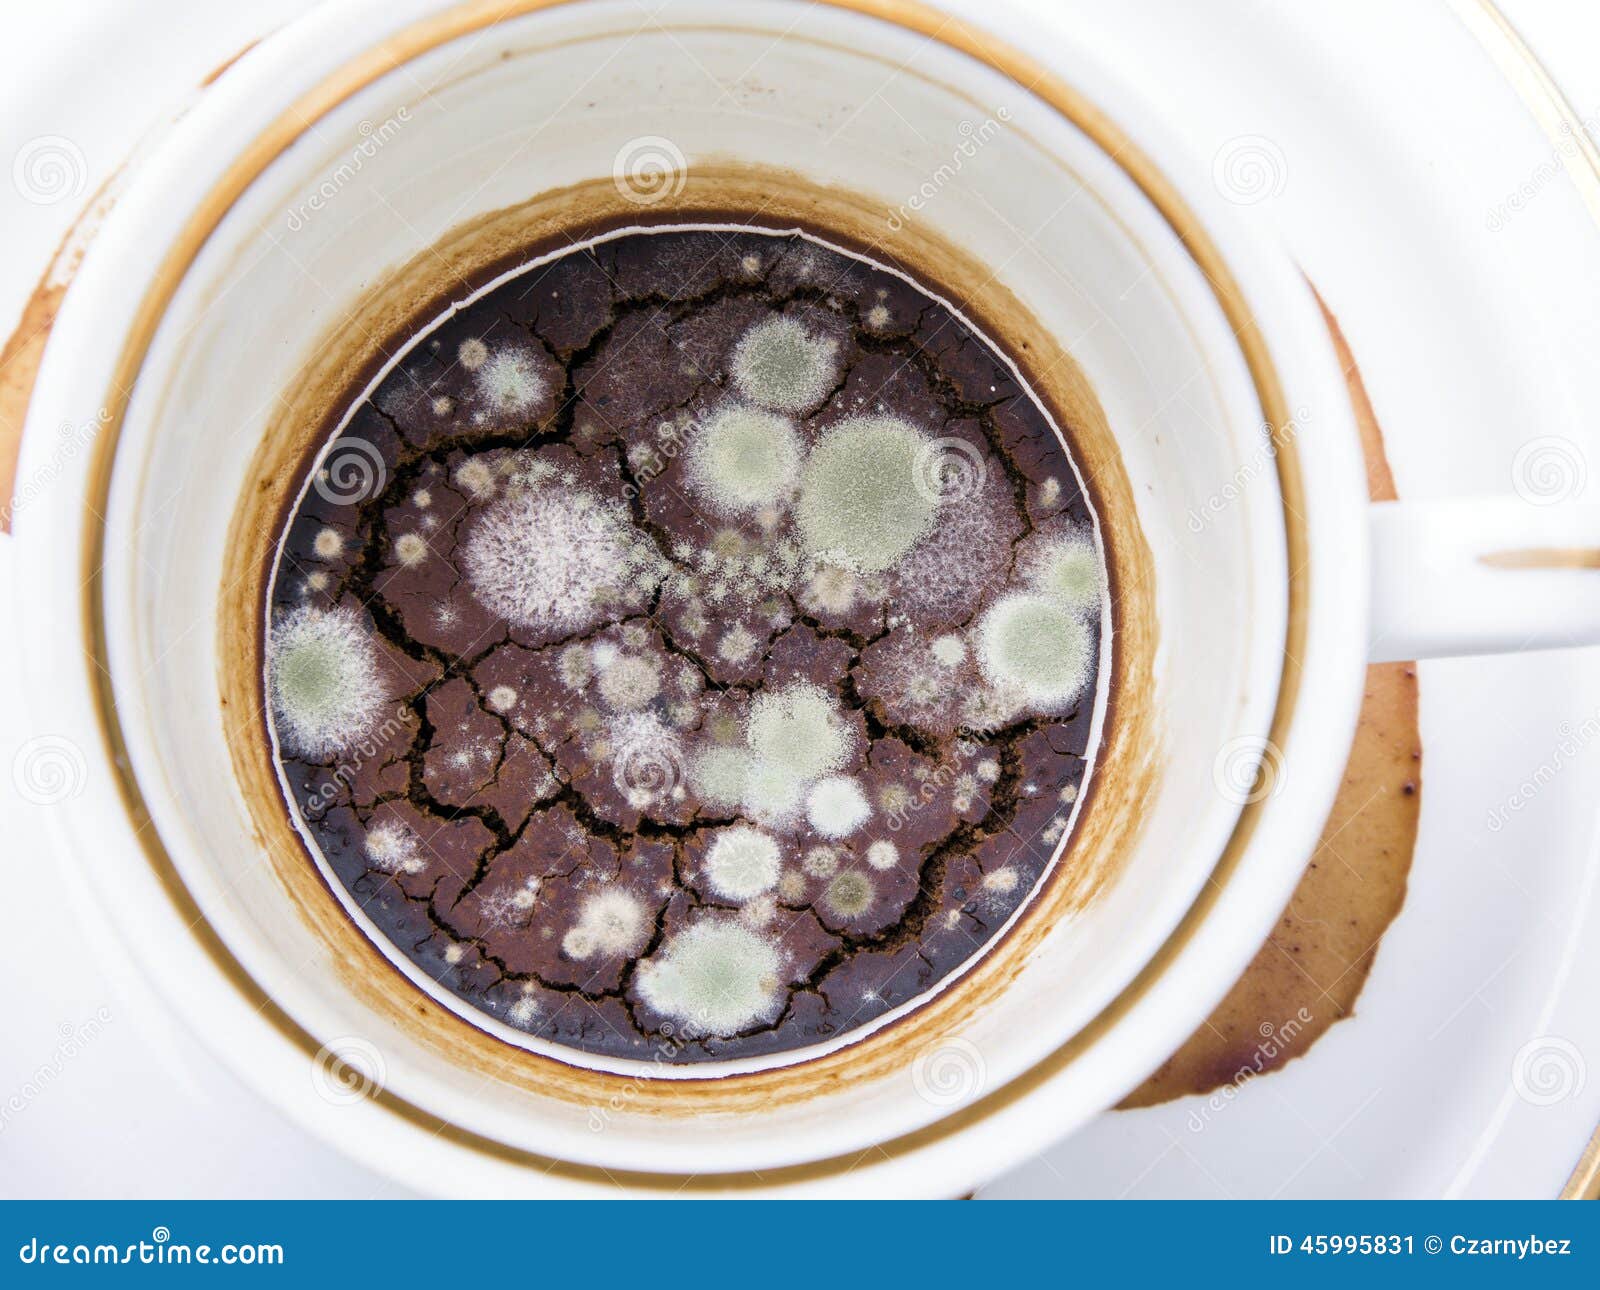 mold-unwashed-cup-coffee-white-background-45995831.jpg